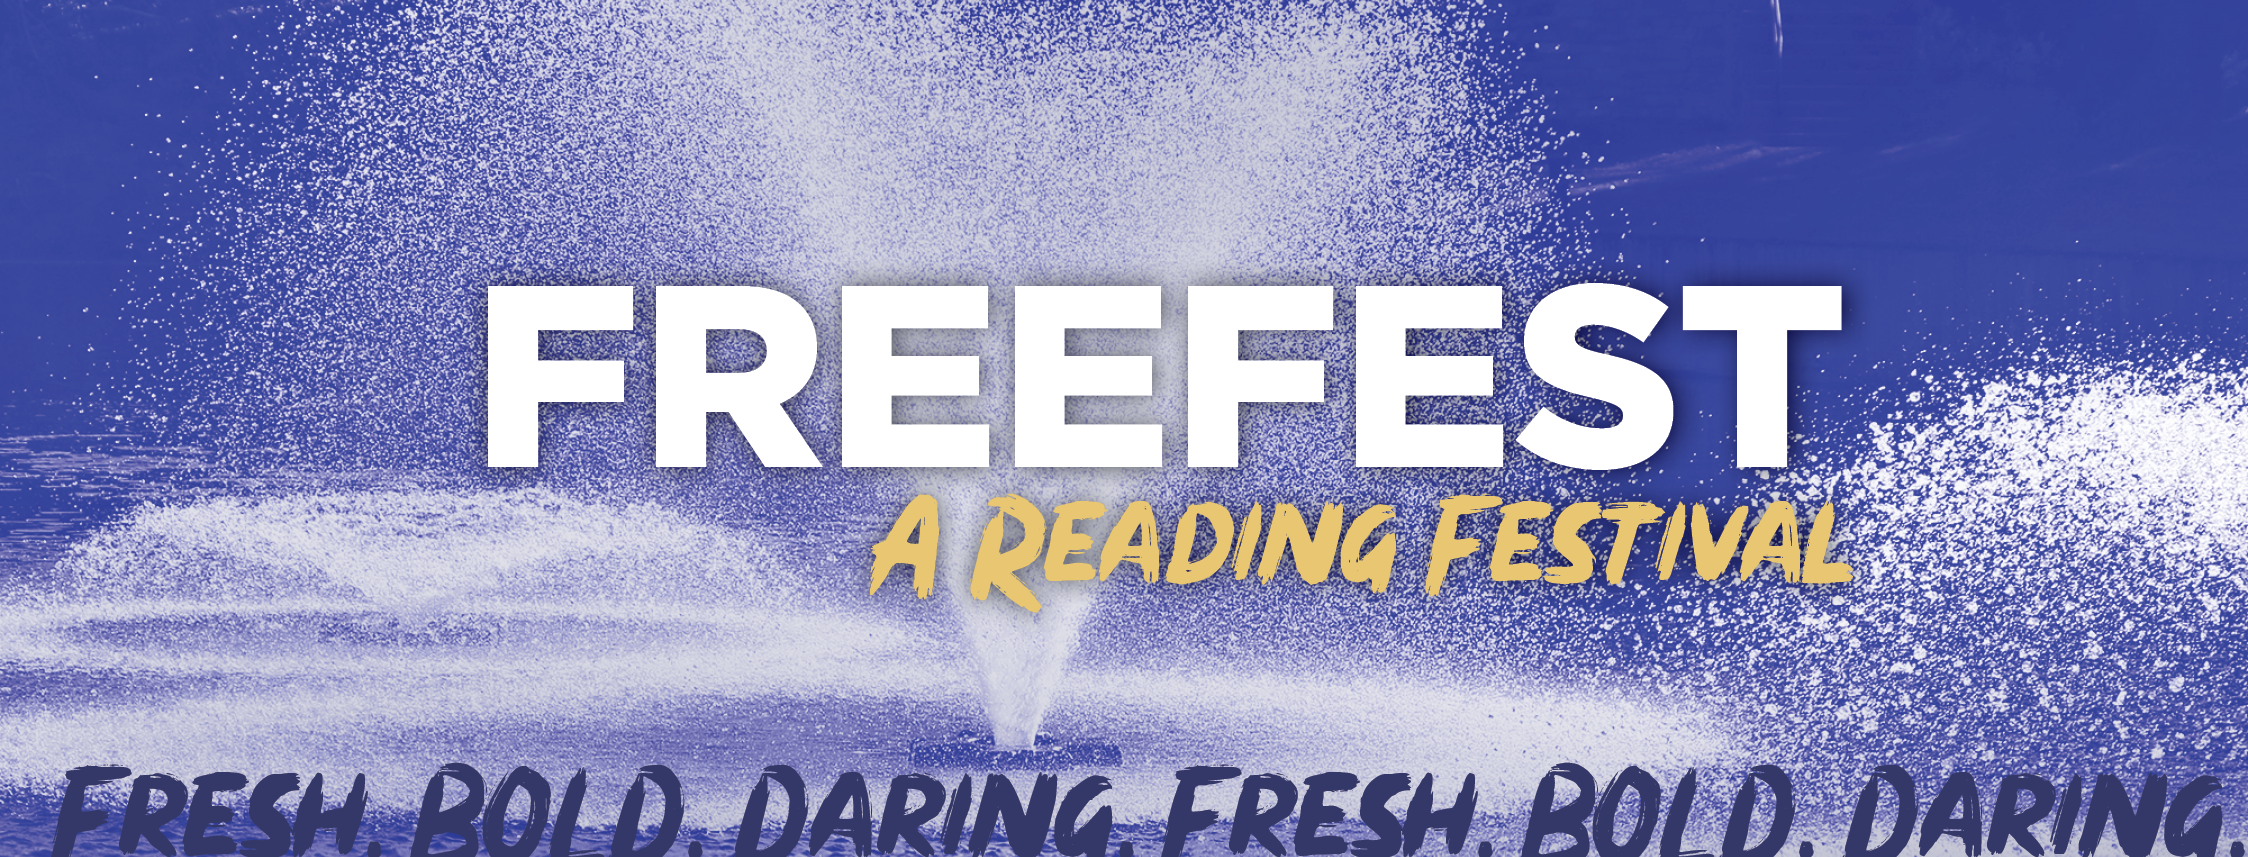 FreeFest: A Reading Festival